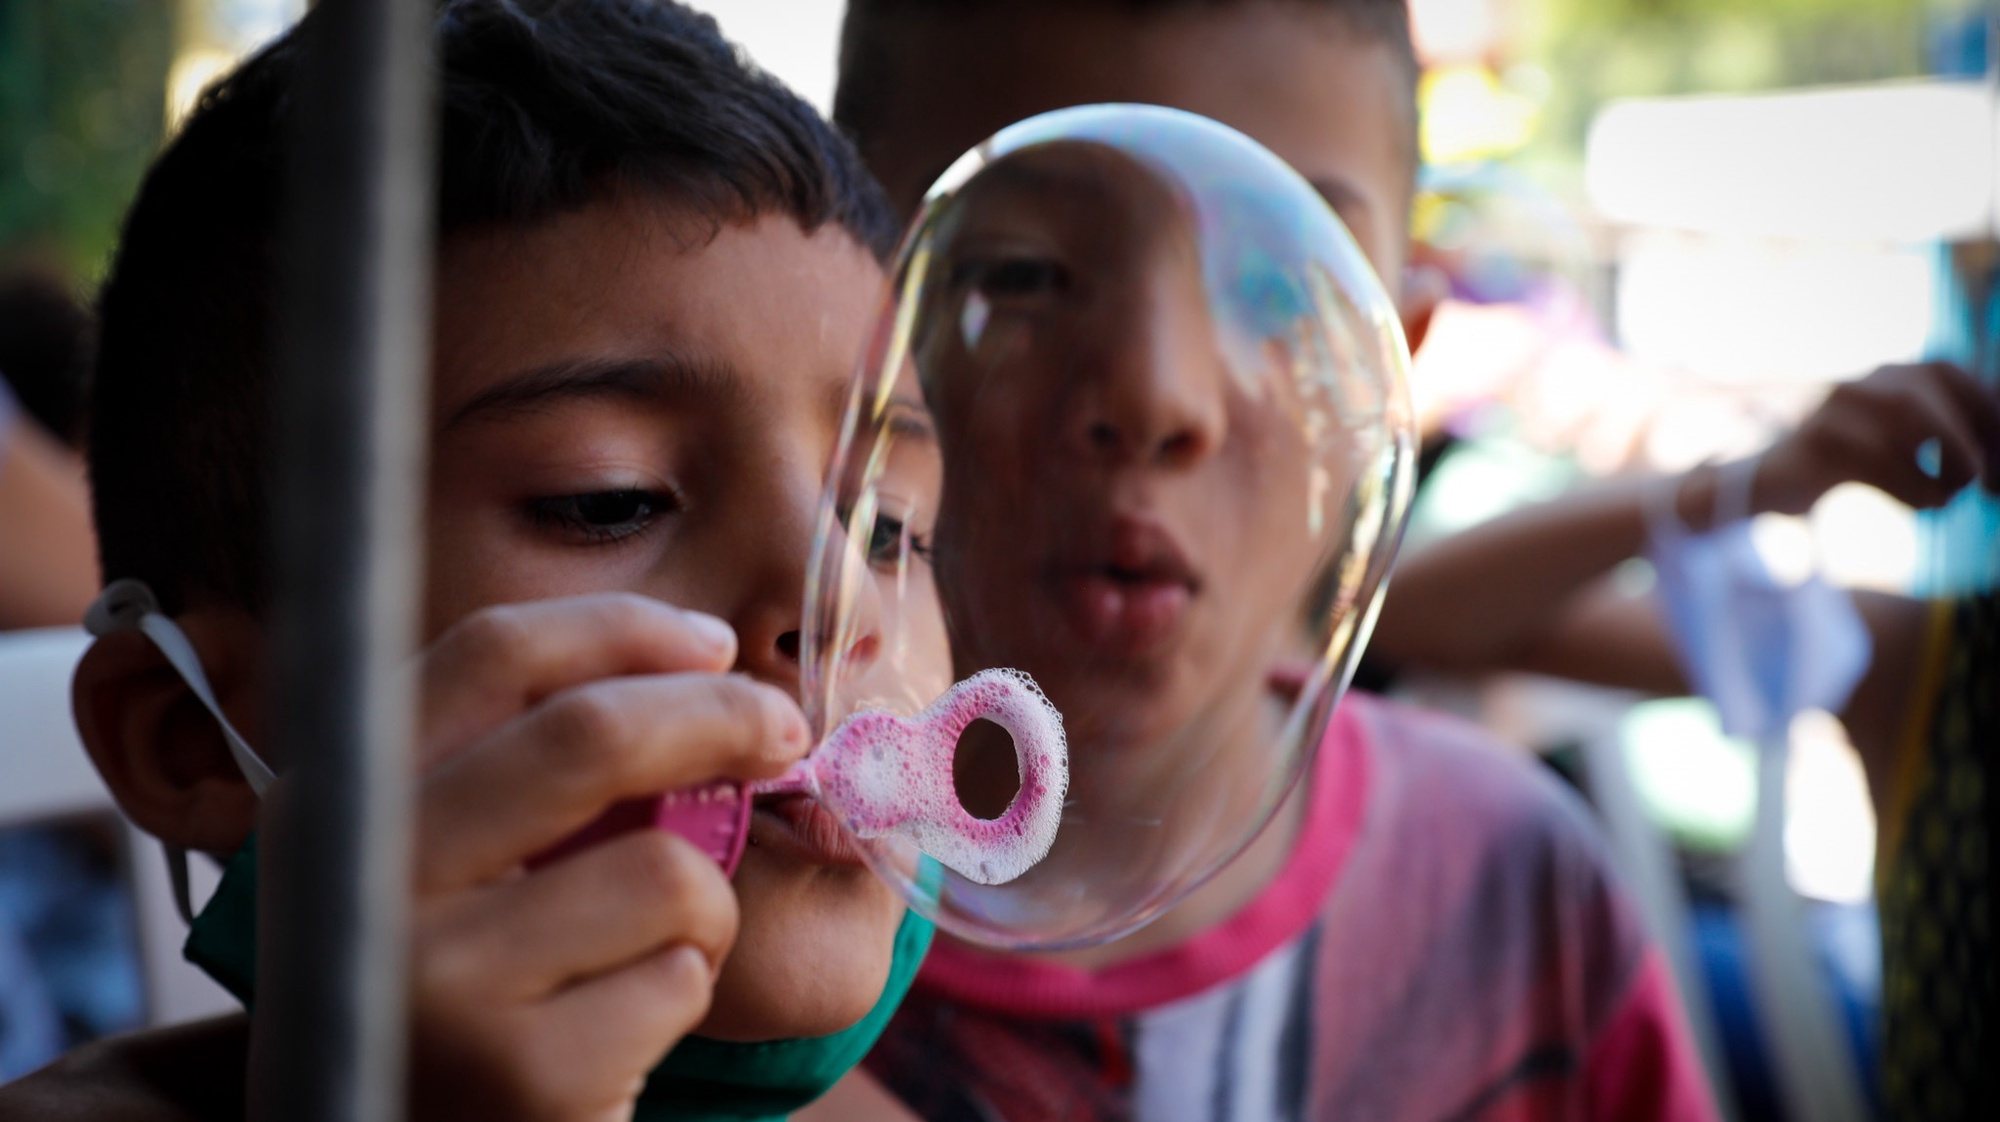 epa09100577 Children play with bubbles during a food donation delivery on 23 March 2021, in the Paraisopolis favela, on Paulista Avenue, in Sao Paulo, Brazil (Issued 27 March 2021). One year after the start of the pandemic, deaths and cases of covid-19 increase day by day in Brazil, but aid for the poorest does not stop falling. In Paraisopolis, one of the largest favelas in Sao Paulo, hunger hits the door of thousands of families hard.  EPA/Fernando Bizerra